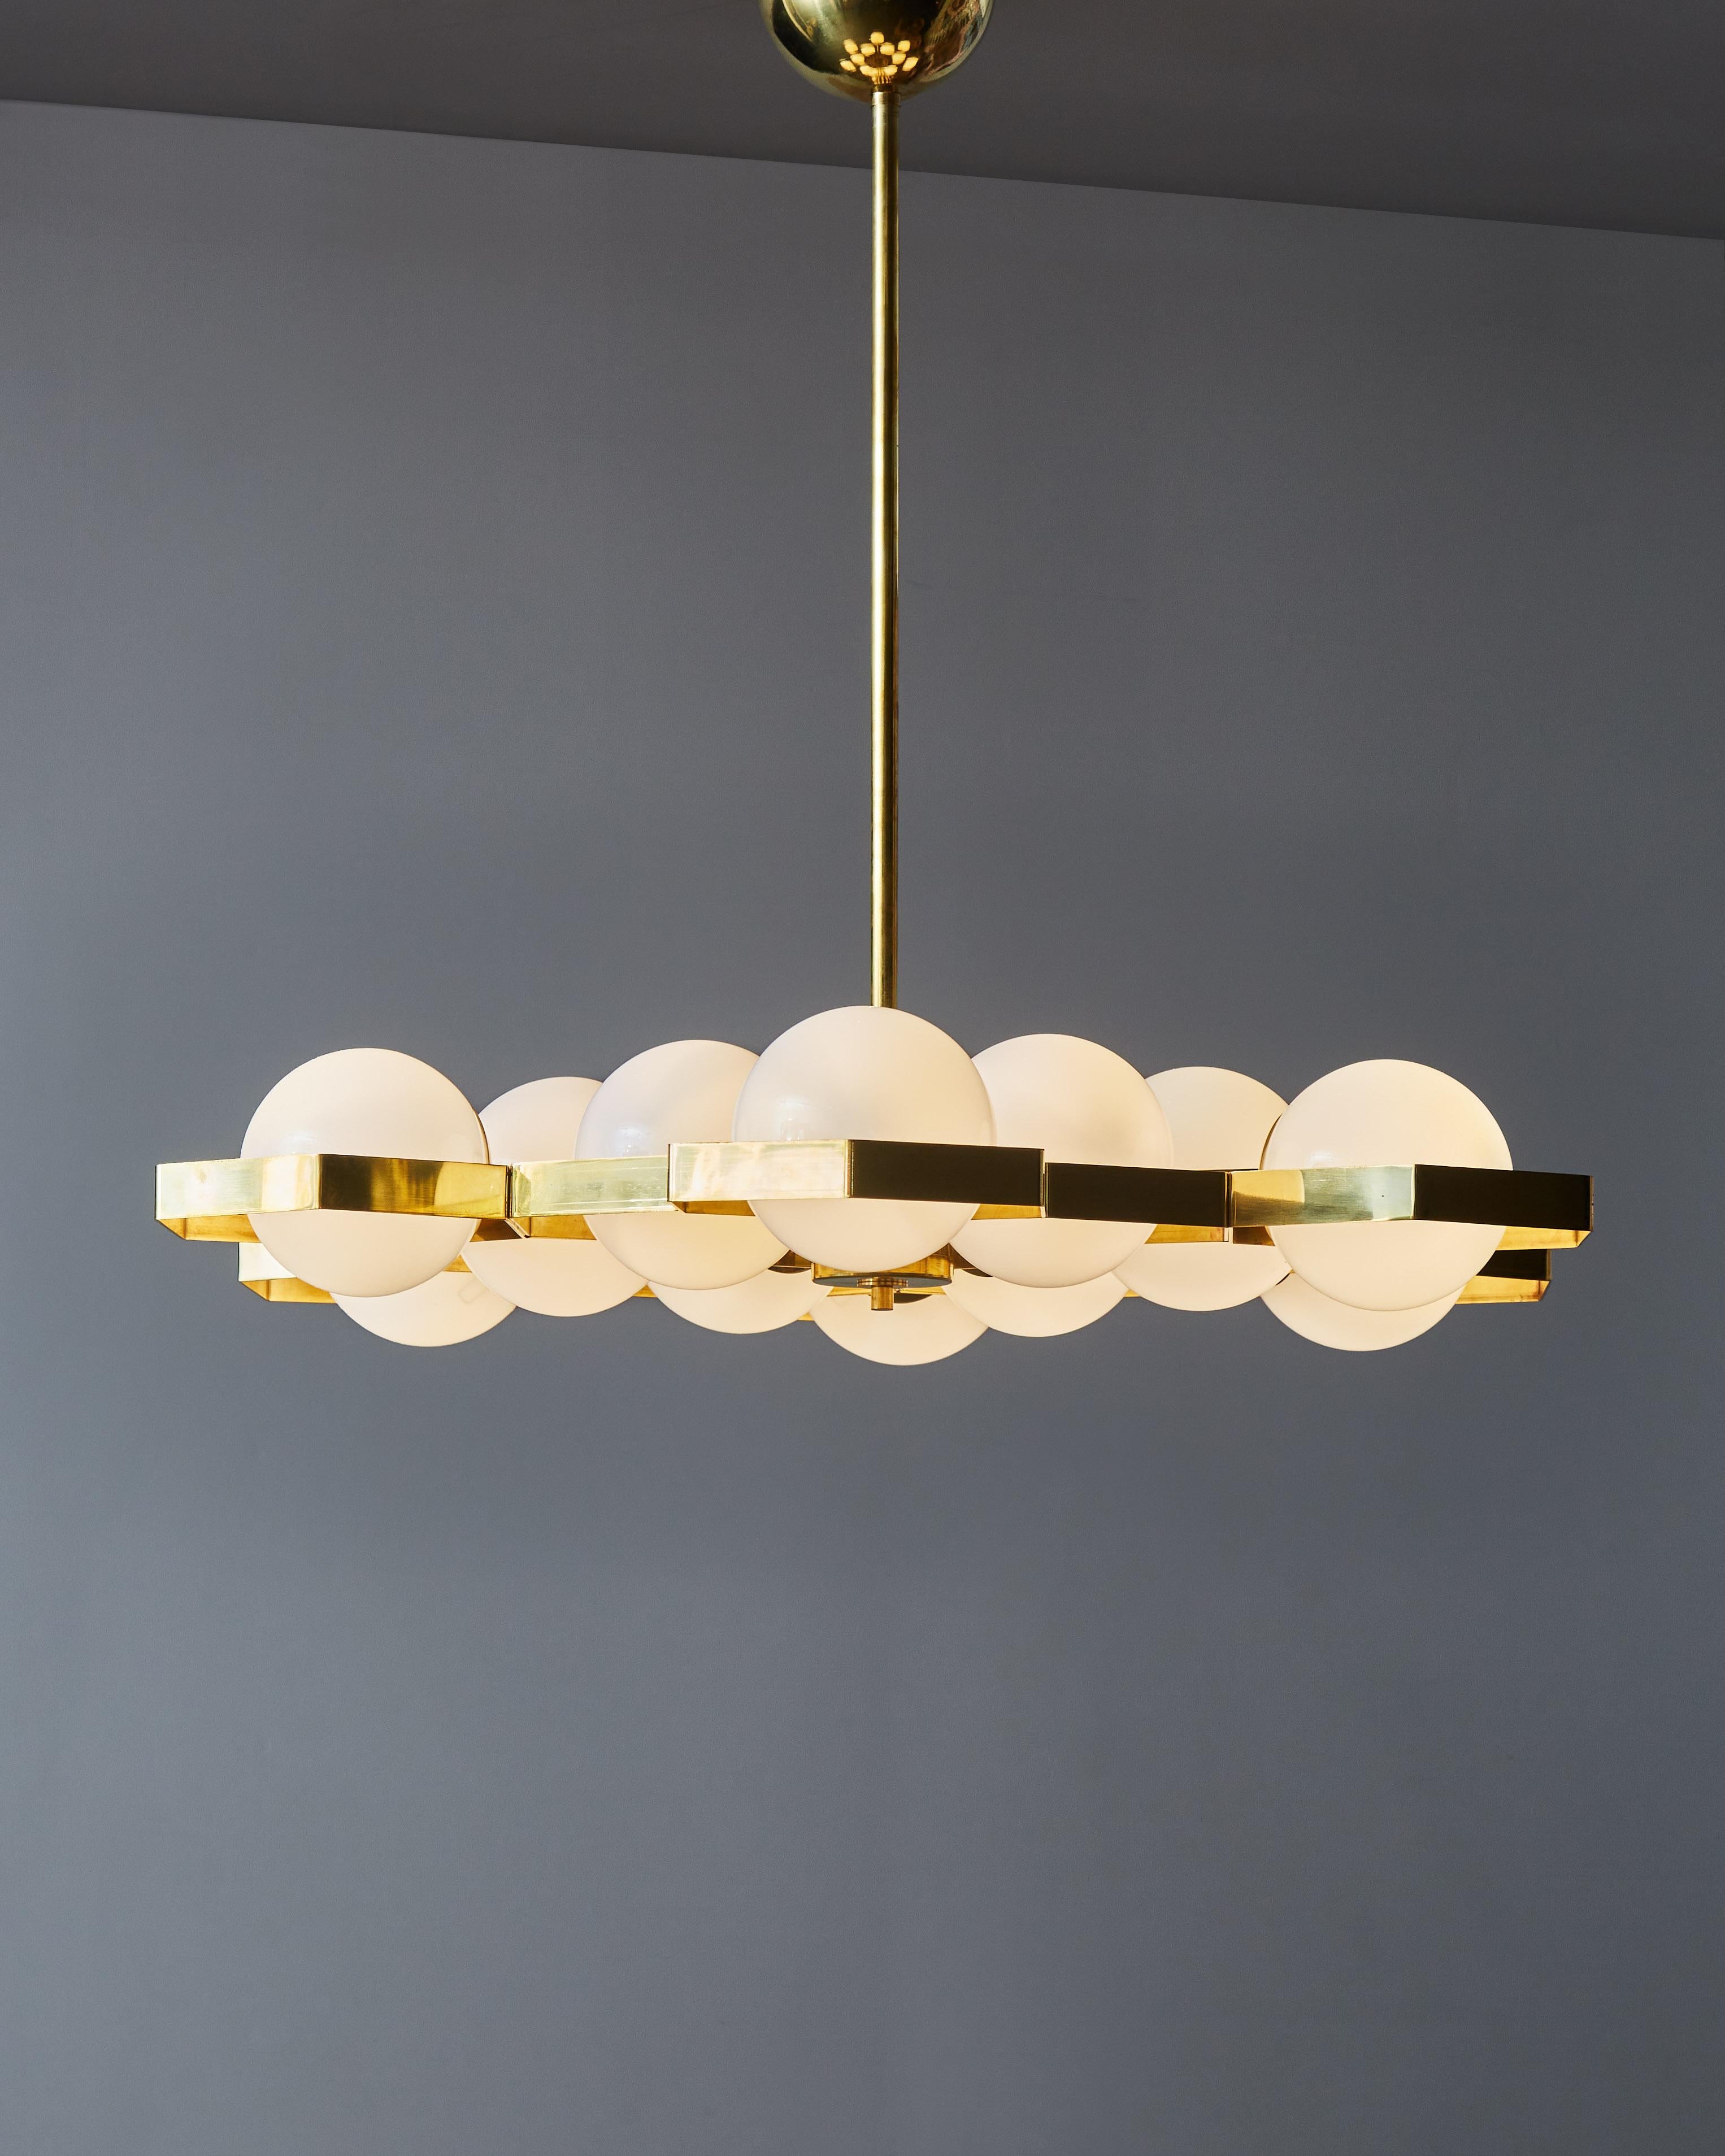 Honeycomb shaped brass chandelier with twelve light sources in opaline glass globes. The vertical rod can be removed to make the piece a flush mount.